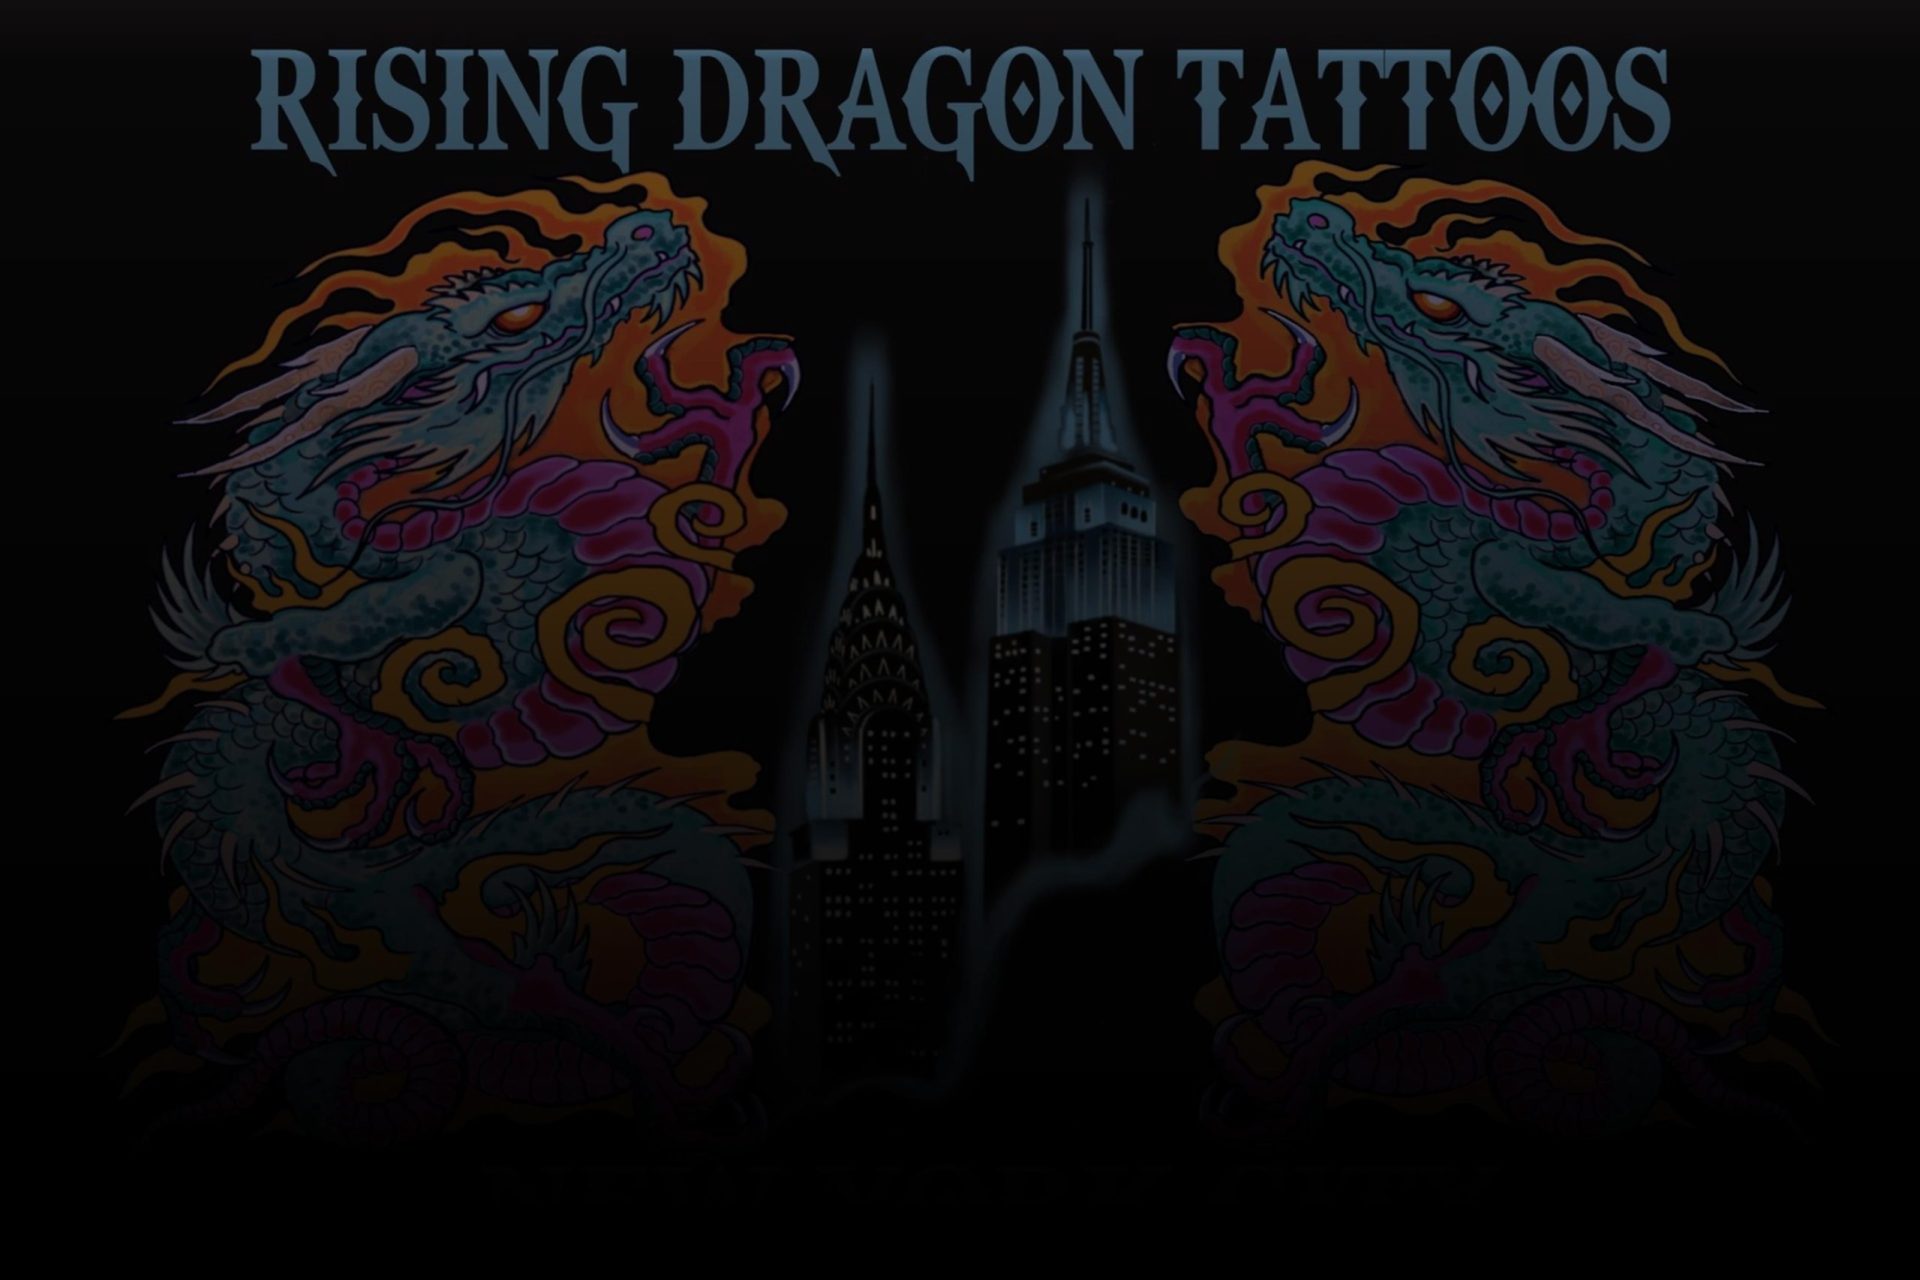 Rising Dragon Tattoos, NYC, One Of The Best Tattoo Shops In NYC